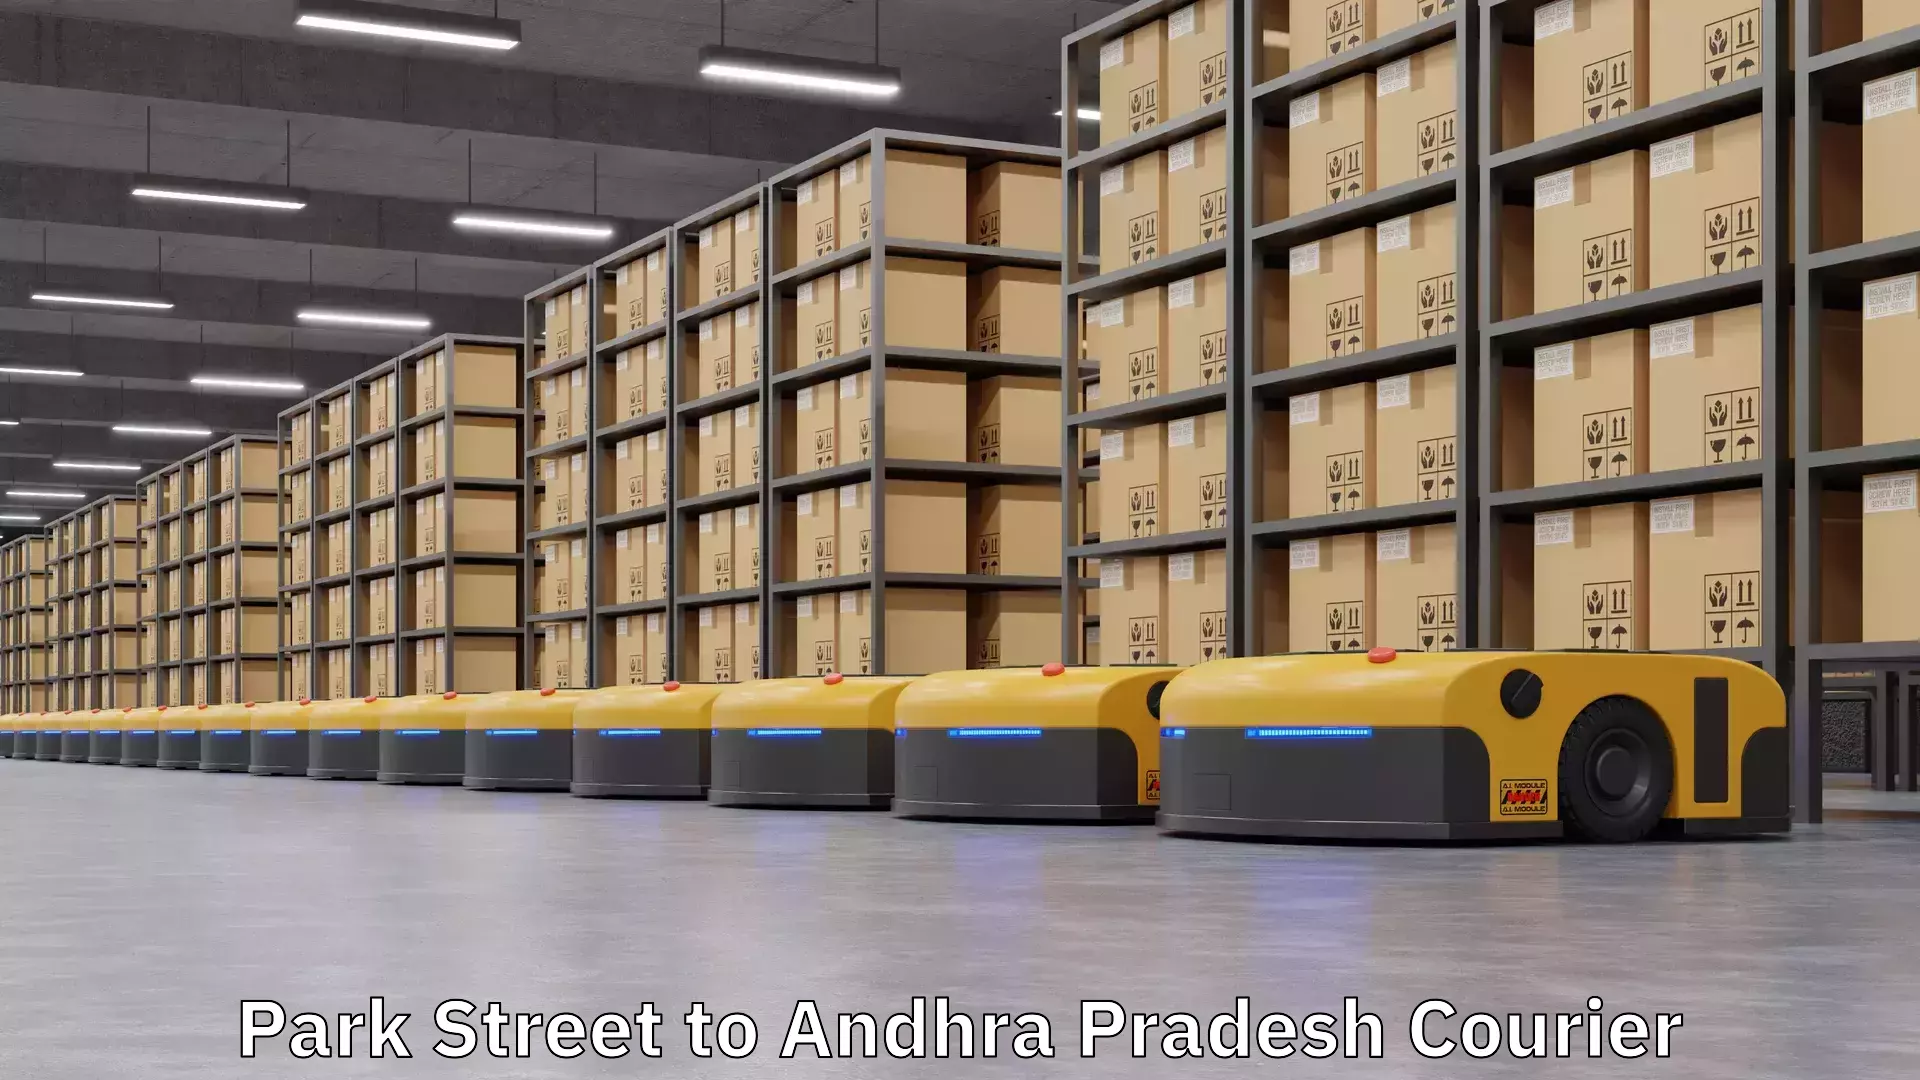 24/7 courier service in Park Street to Andhra Pradesh